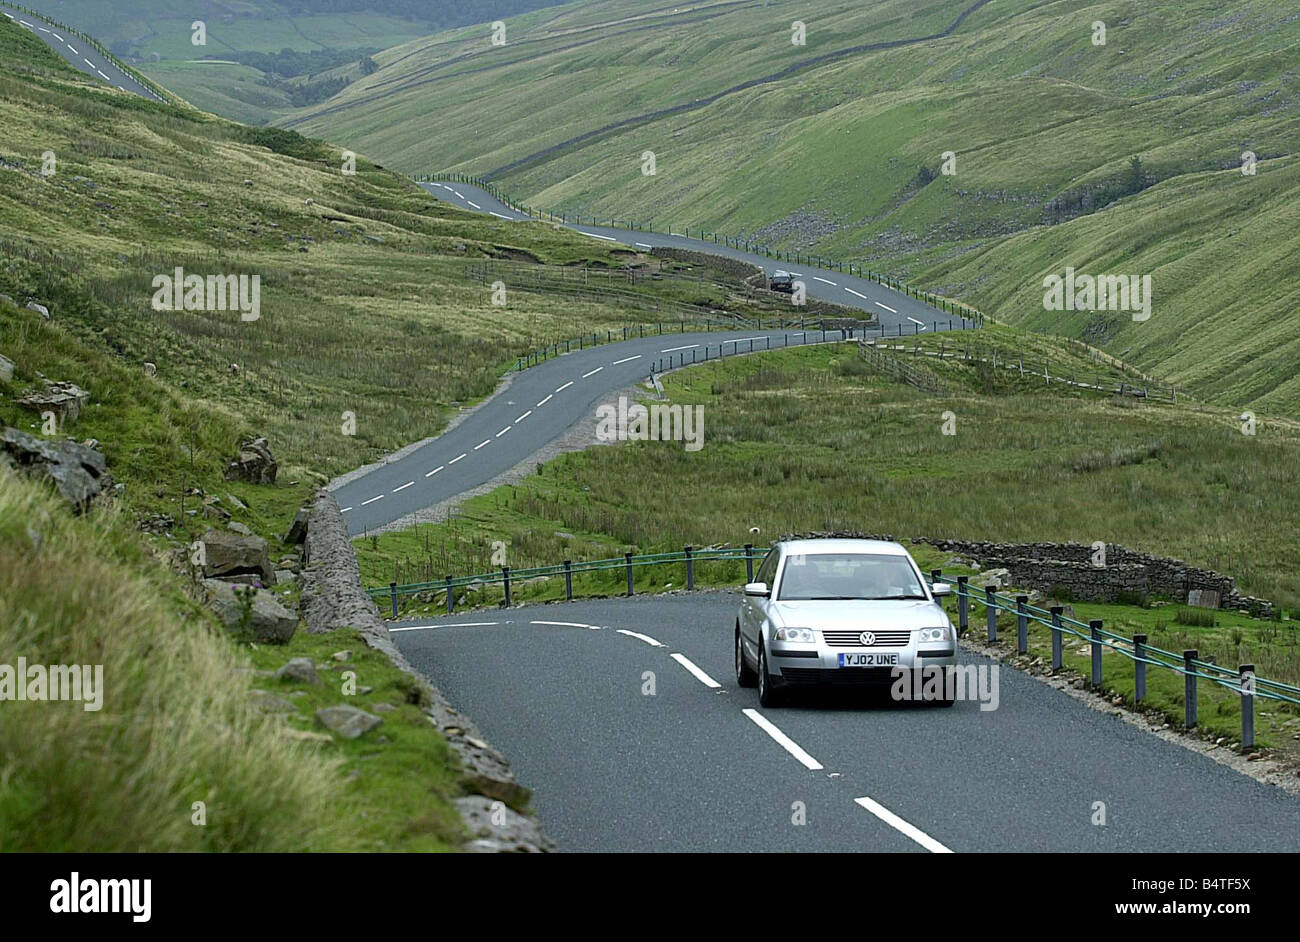 Picture by Phil Spencer Britain s No 1 driving road Buttertubs Pass near Hawes North Yorkshire Buttertubs Pass was yesterday voted BritainÍs favourite road The scenic pass through the Yorkshire Dales was chosen as BritainÍs ultimate driving experience in a survey of 2 100 drivers TV motoring guru Jeremy Clarkson hailed the road between Hawes and Thwaite as ñEnglandÍs only truly spectacular roadî The top three roads all surfaced in the North while the South East did not feature anywhere in the top ten Car maker Honda conducted the survey as part of their research into positive driving Stock Photo